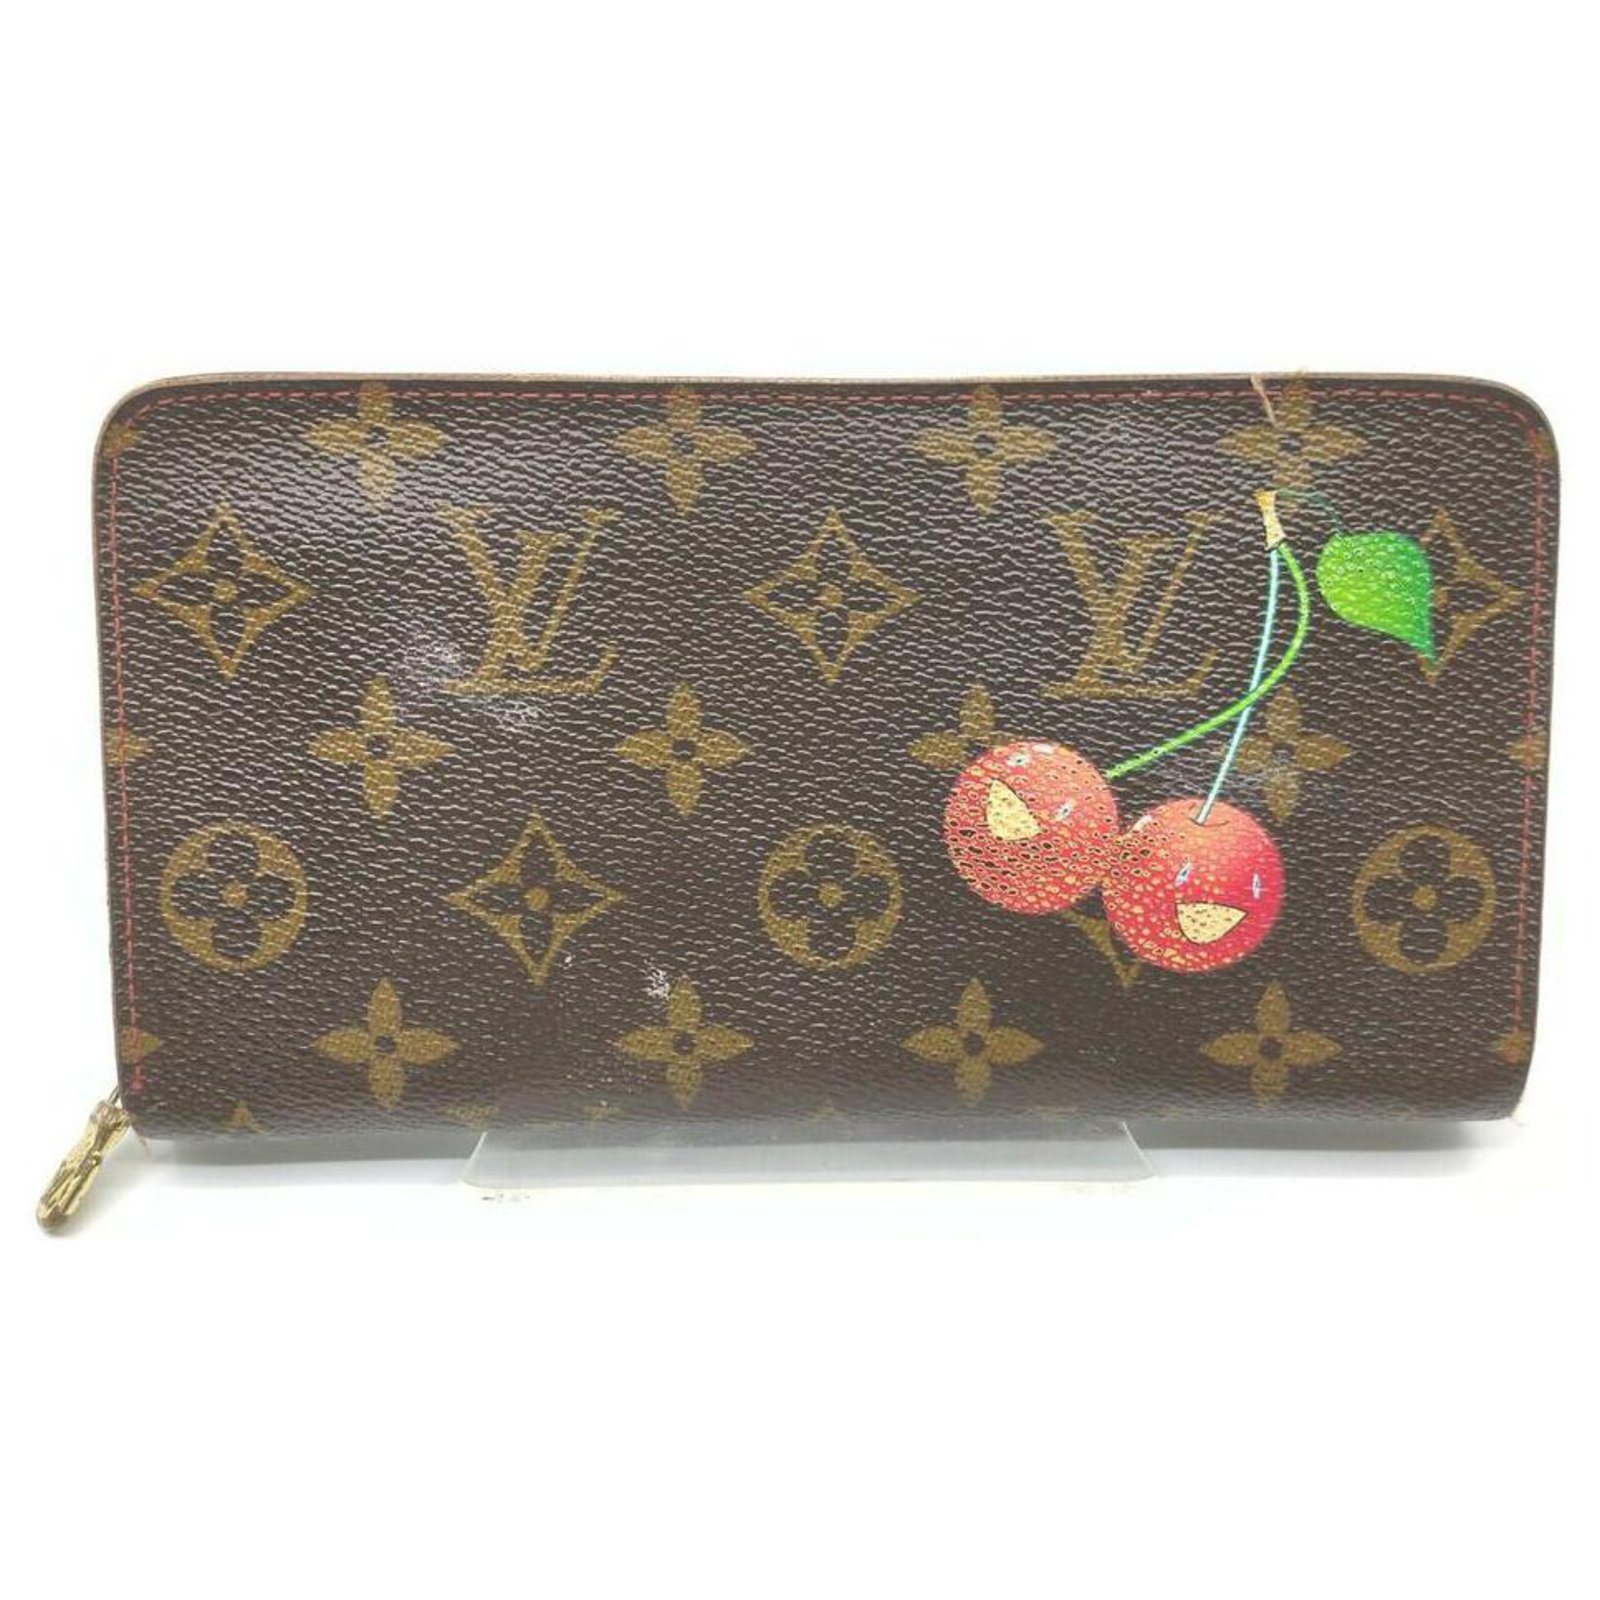 lv bag with cherries